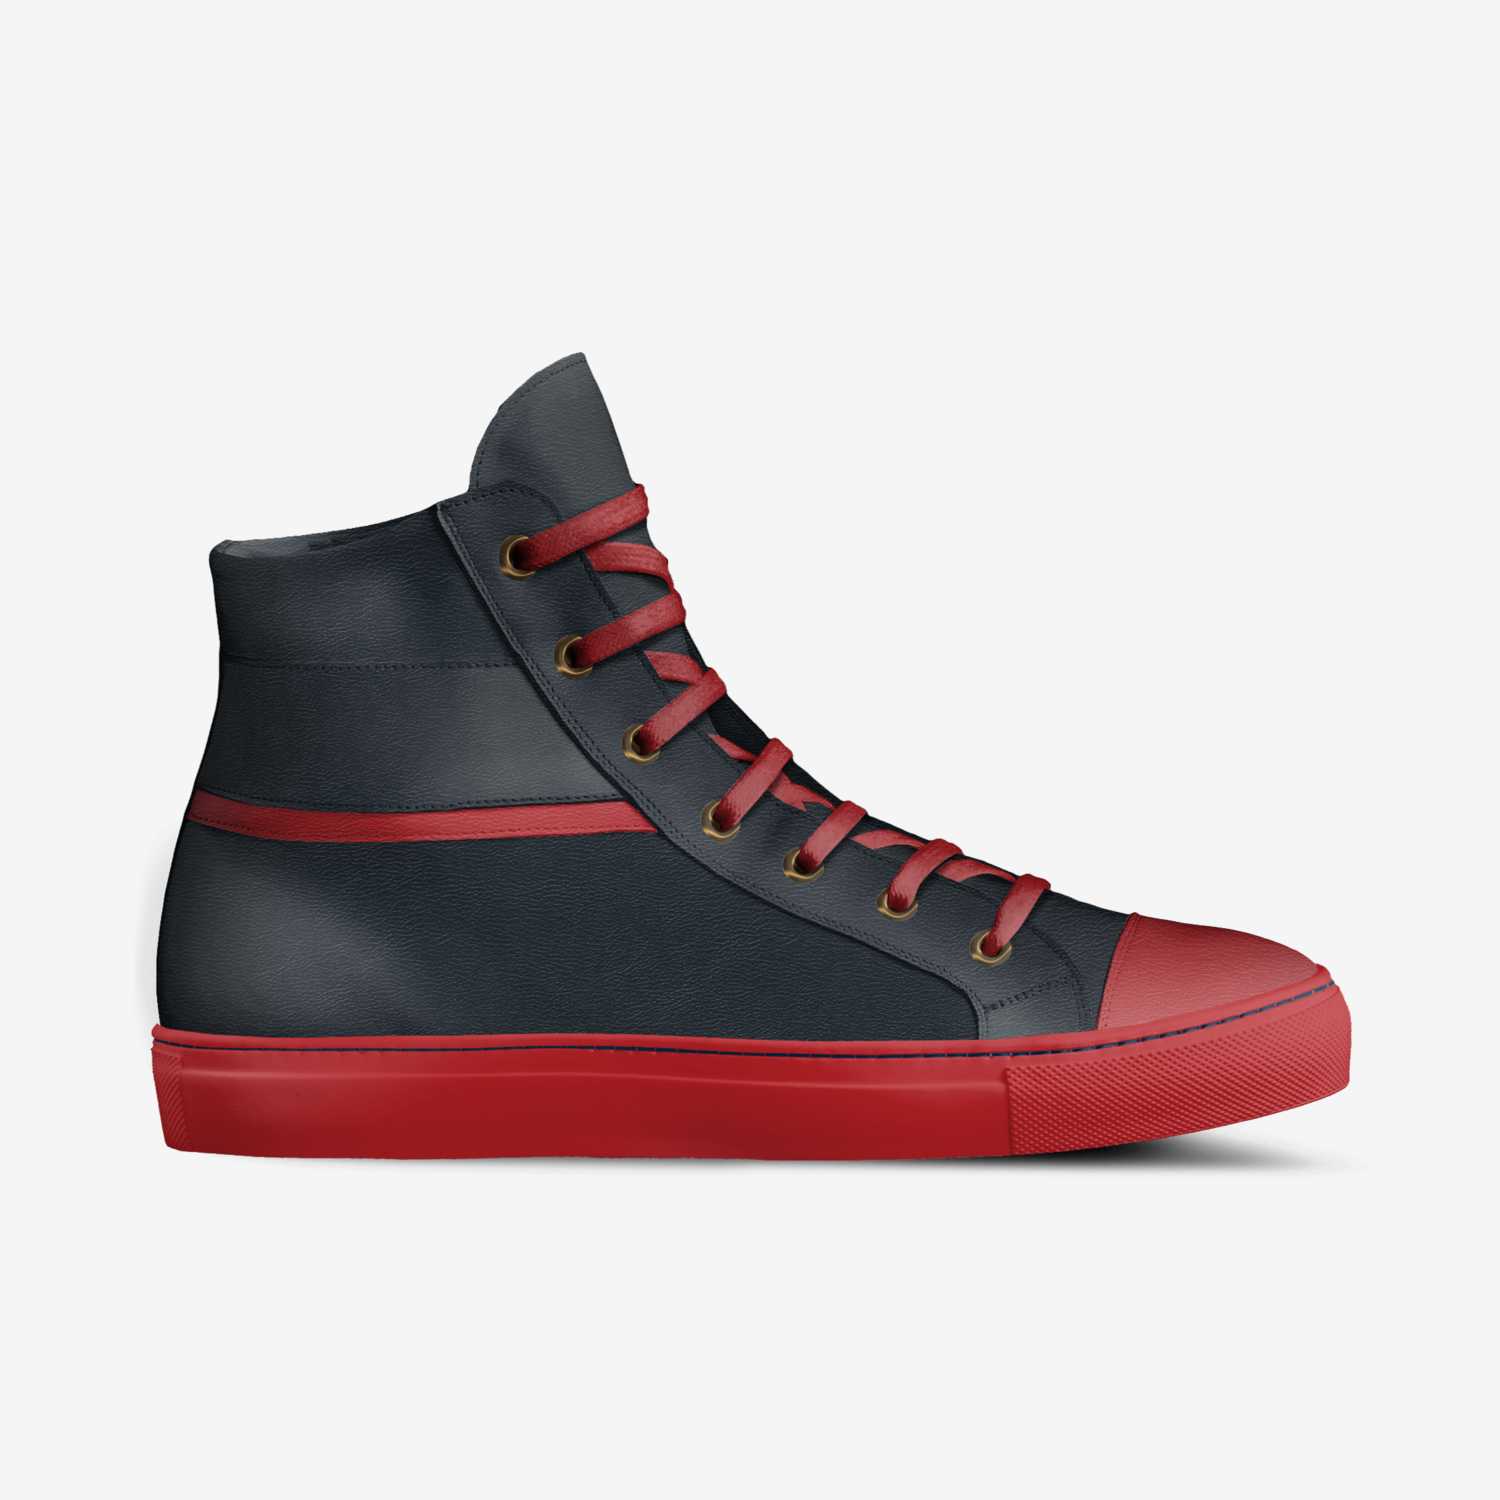 Legend custom made in Italy shoes by Breandon Jones | Side view